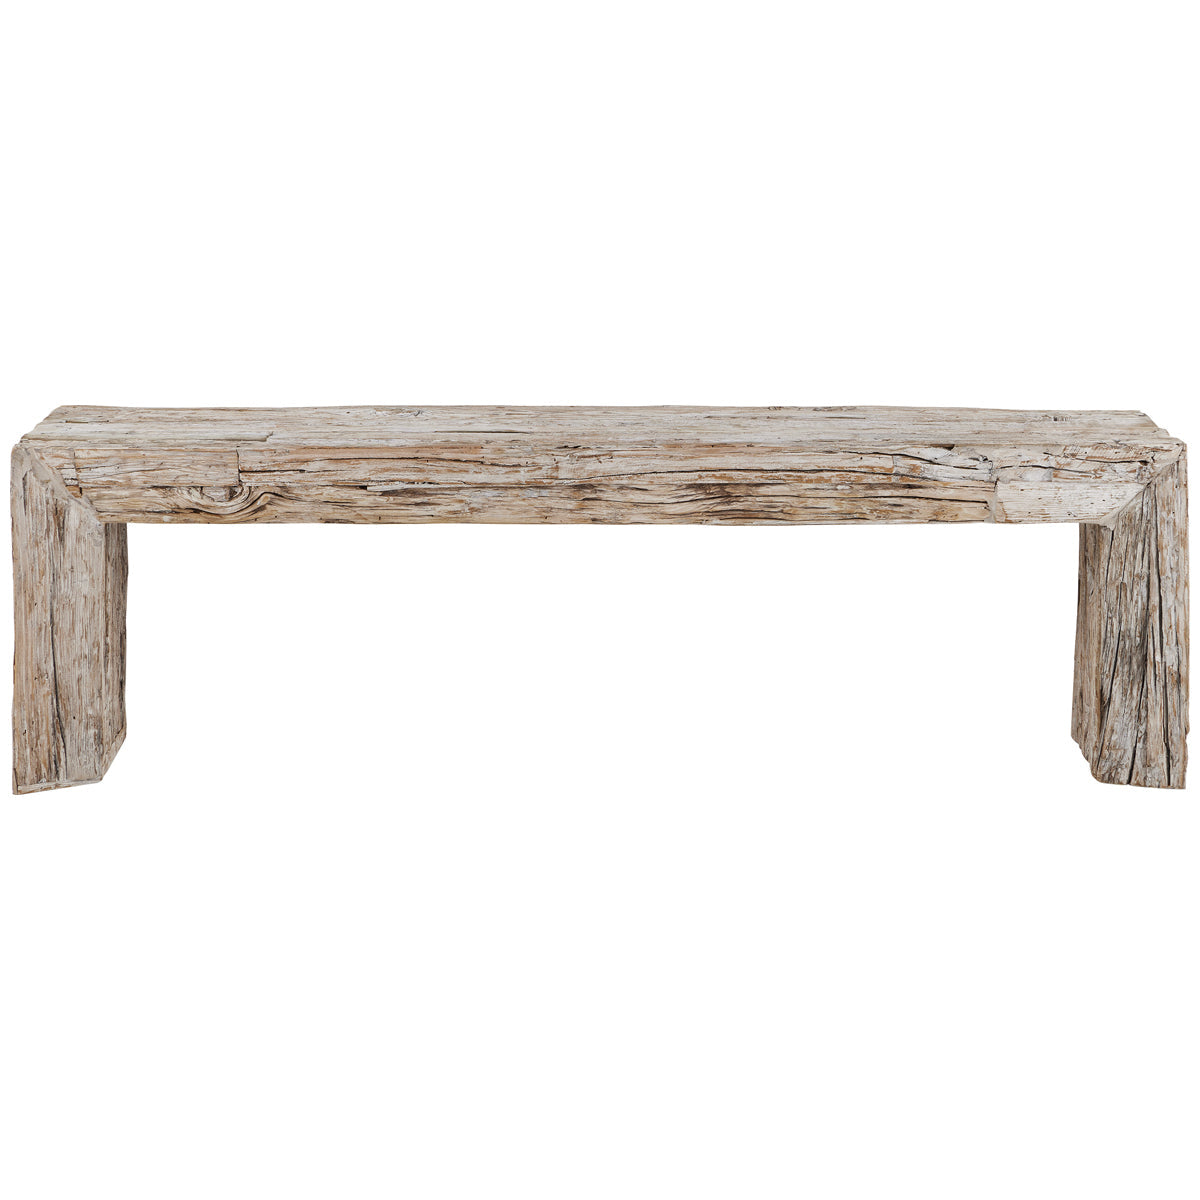 Currey and Company Kanor Bench